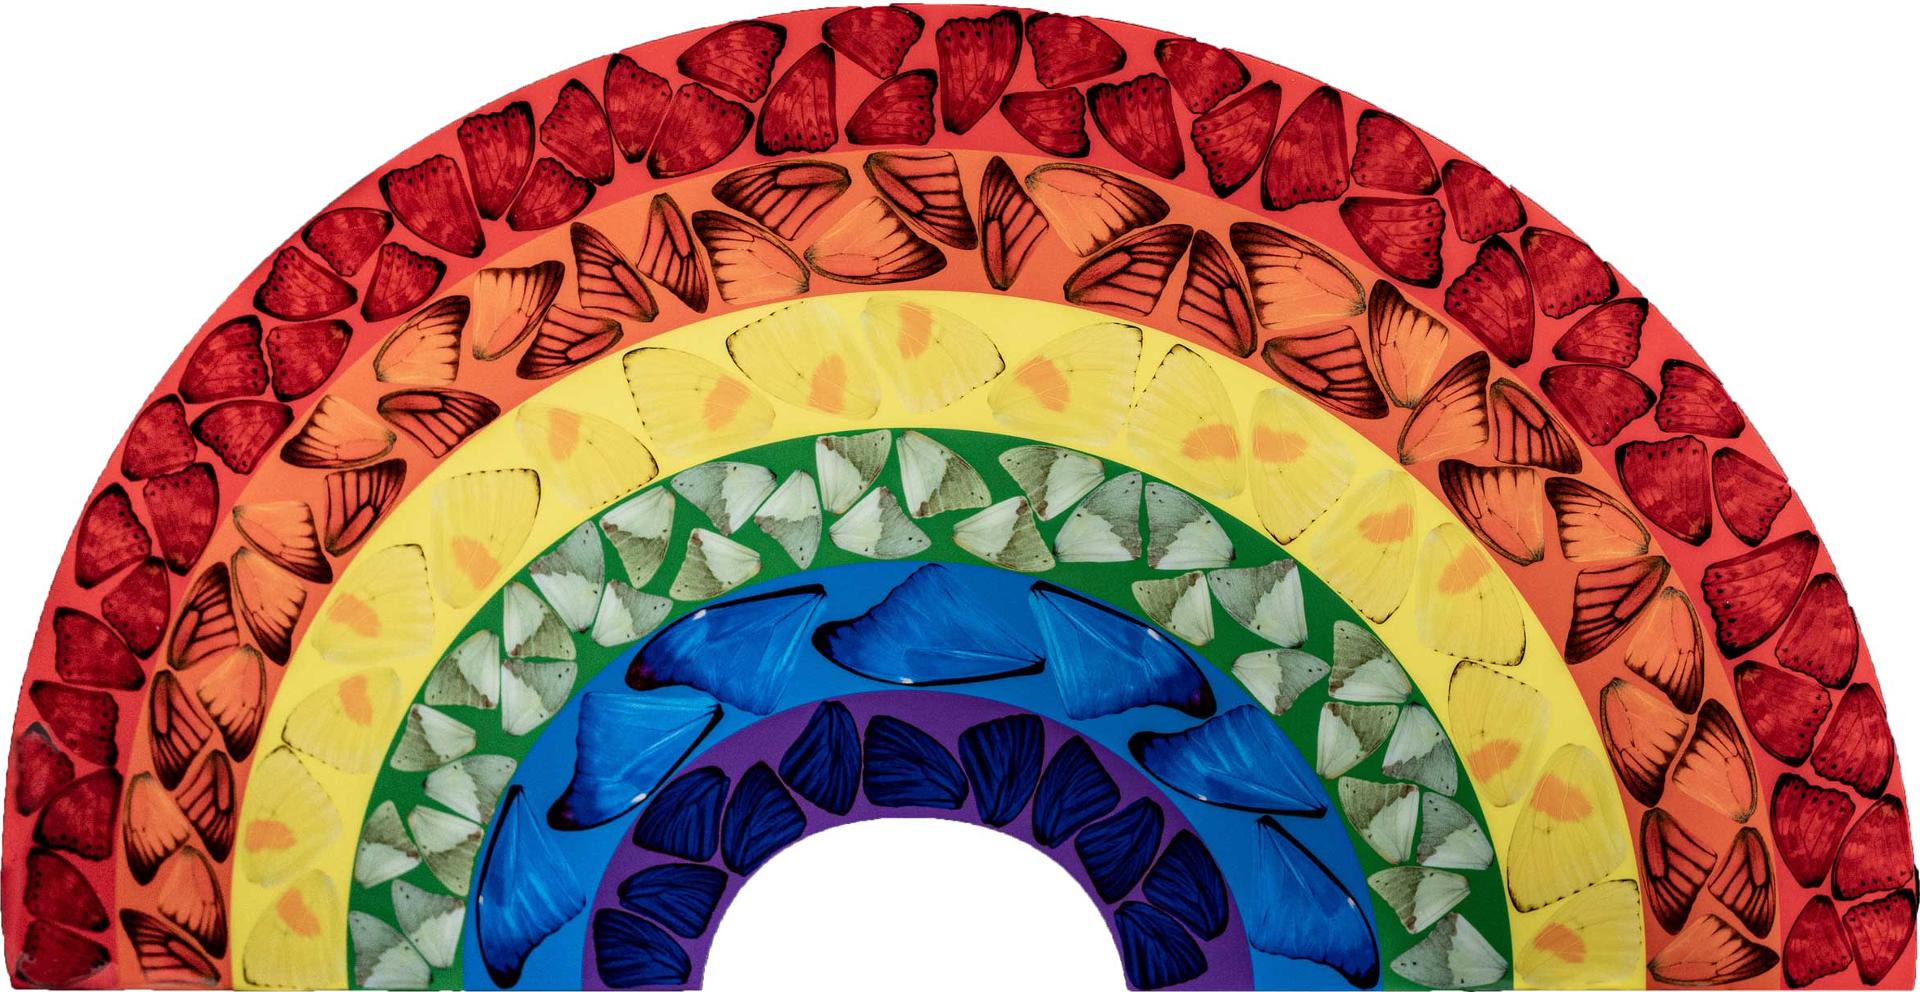 Damien Hirst (1965) - Butterfly Rainbow (Large), [h7-1], 2020